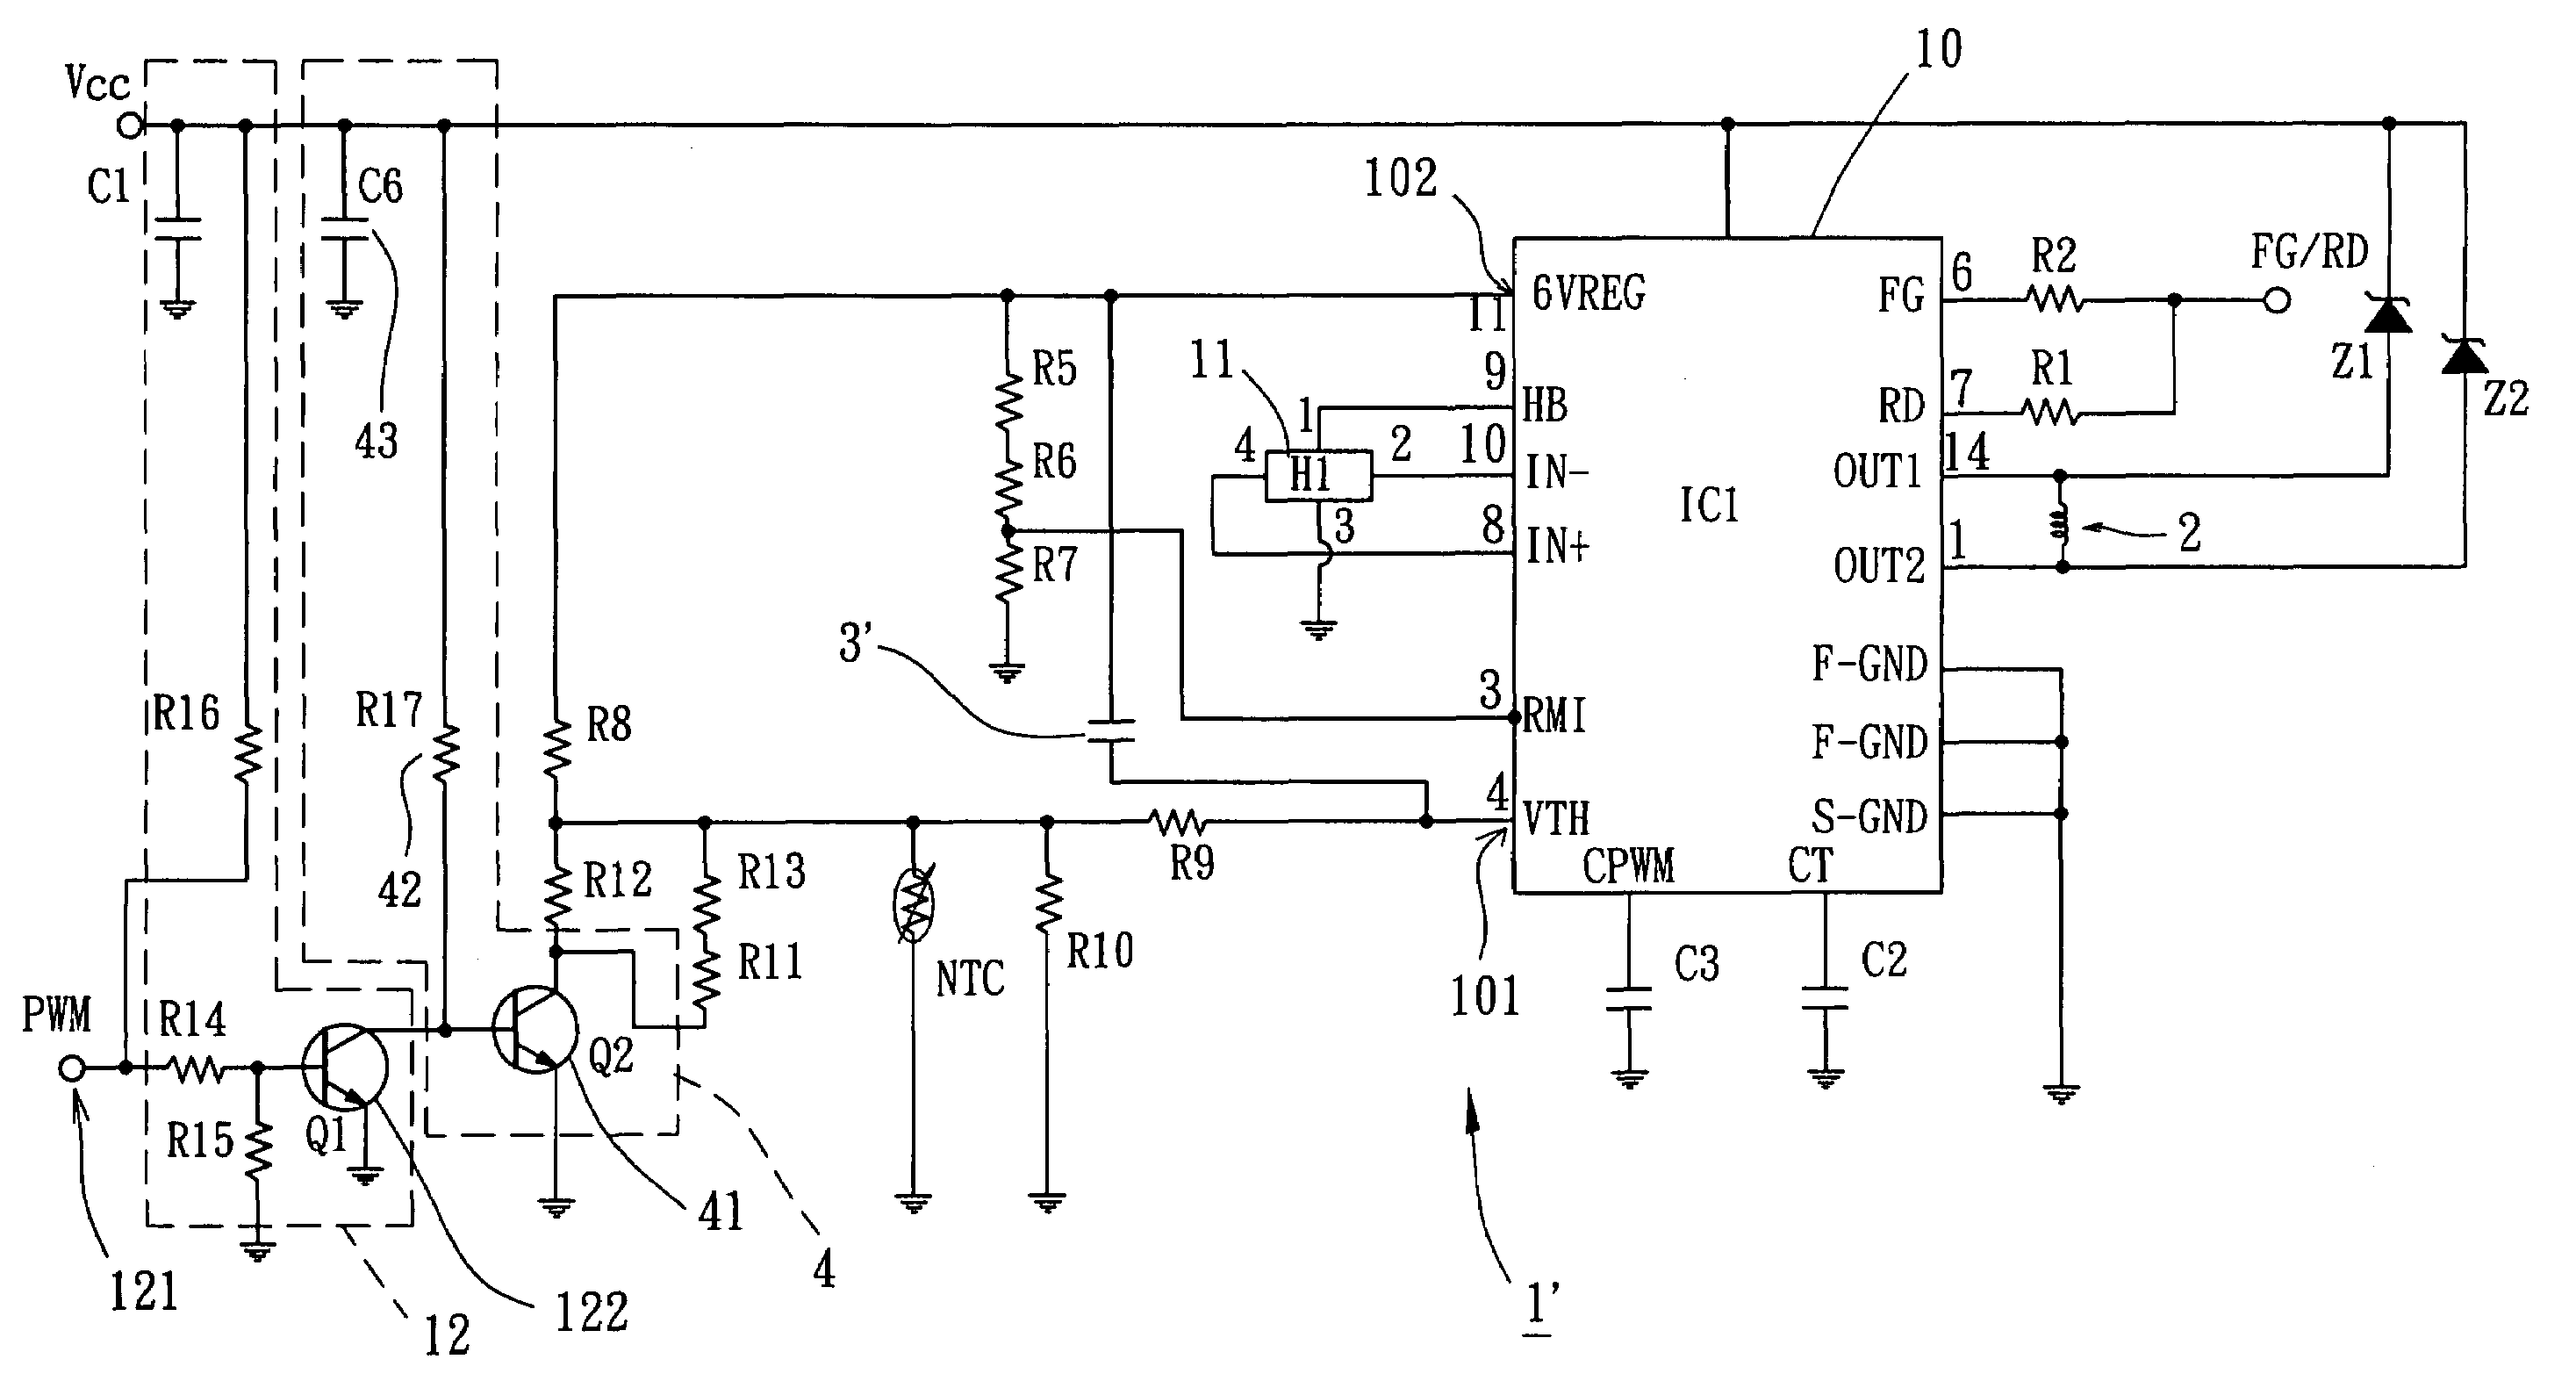 Frequency-variable pulse-width-modulation motor drive circuit capable of operating under different PWM frequencies